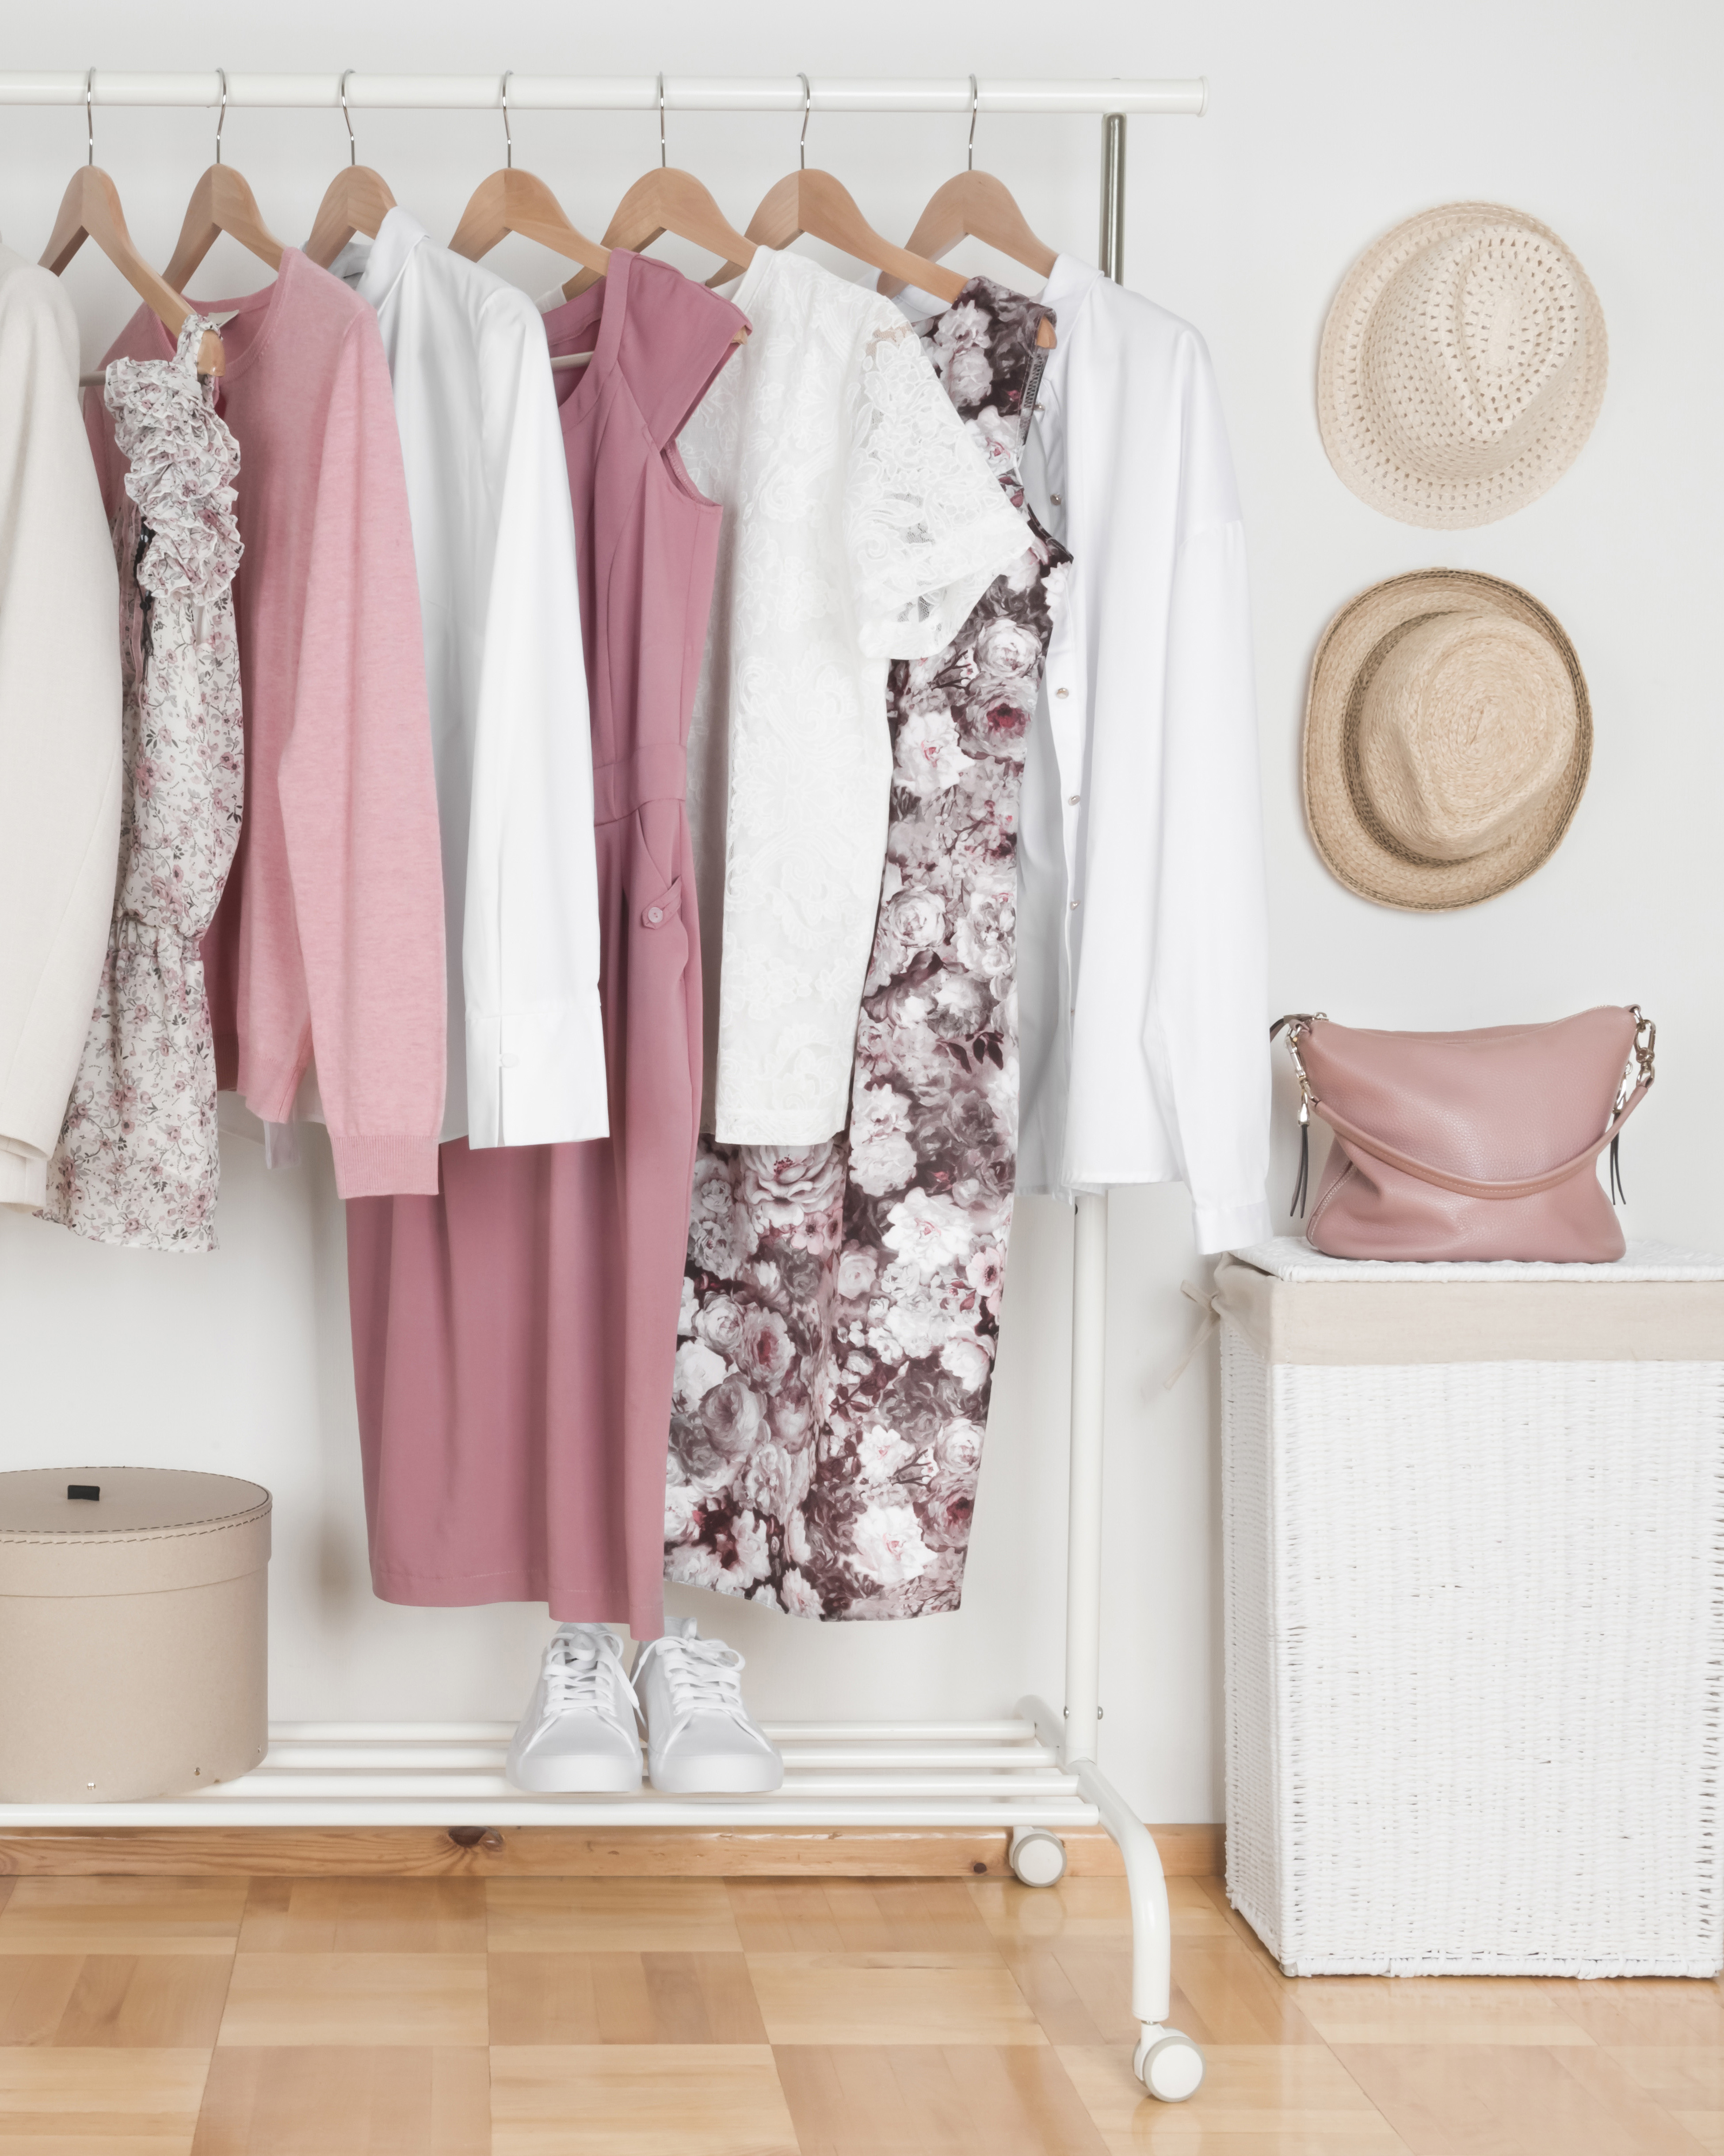 Capsule wardrobe sewn by you